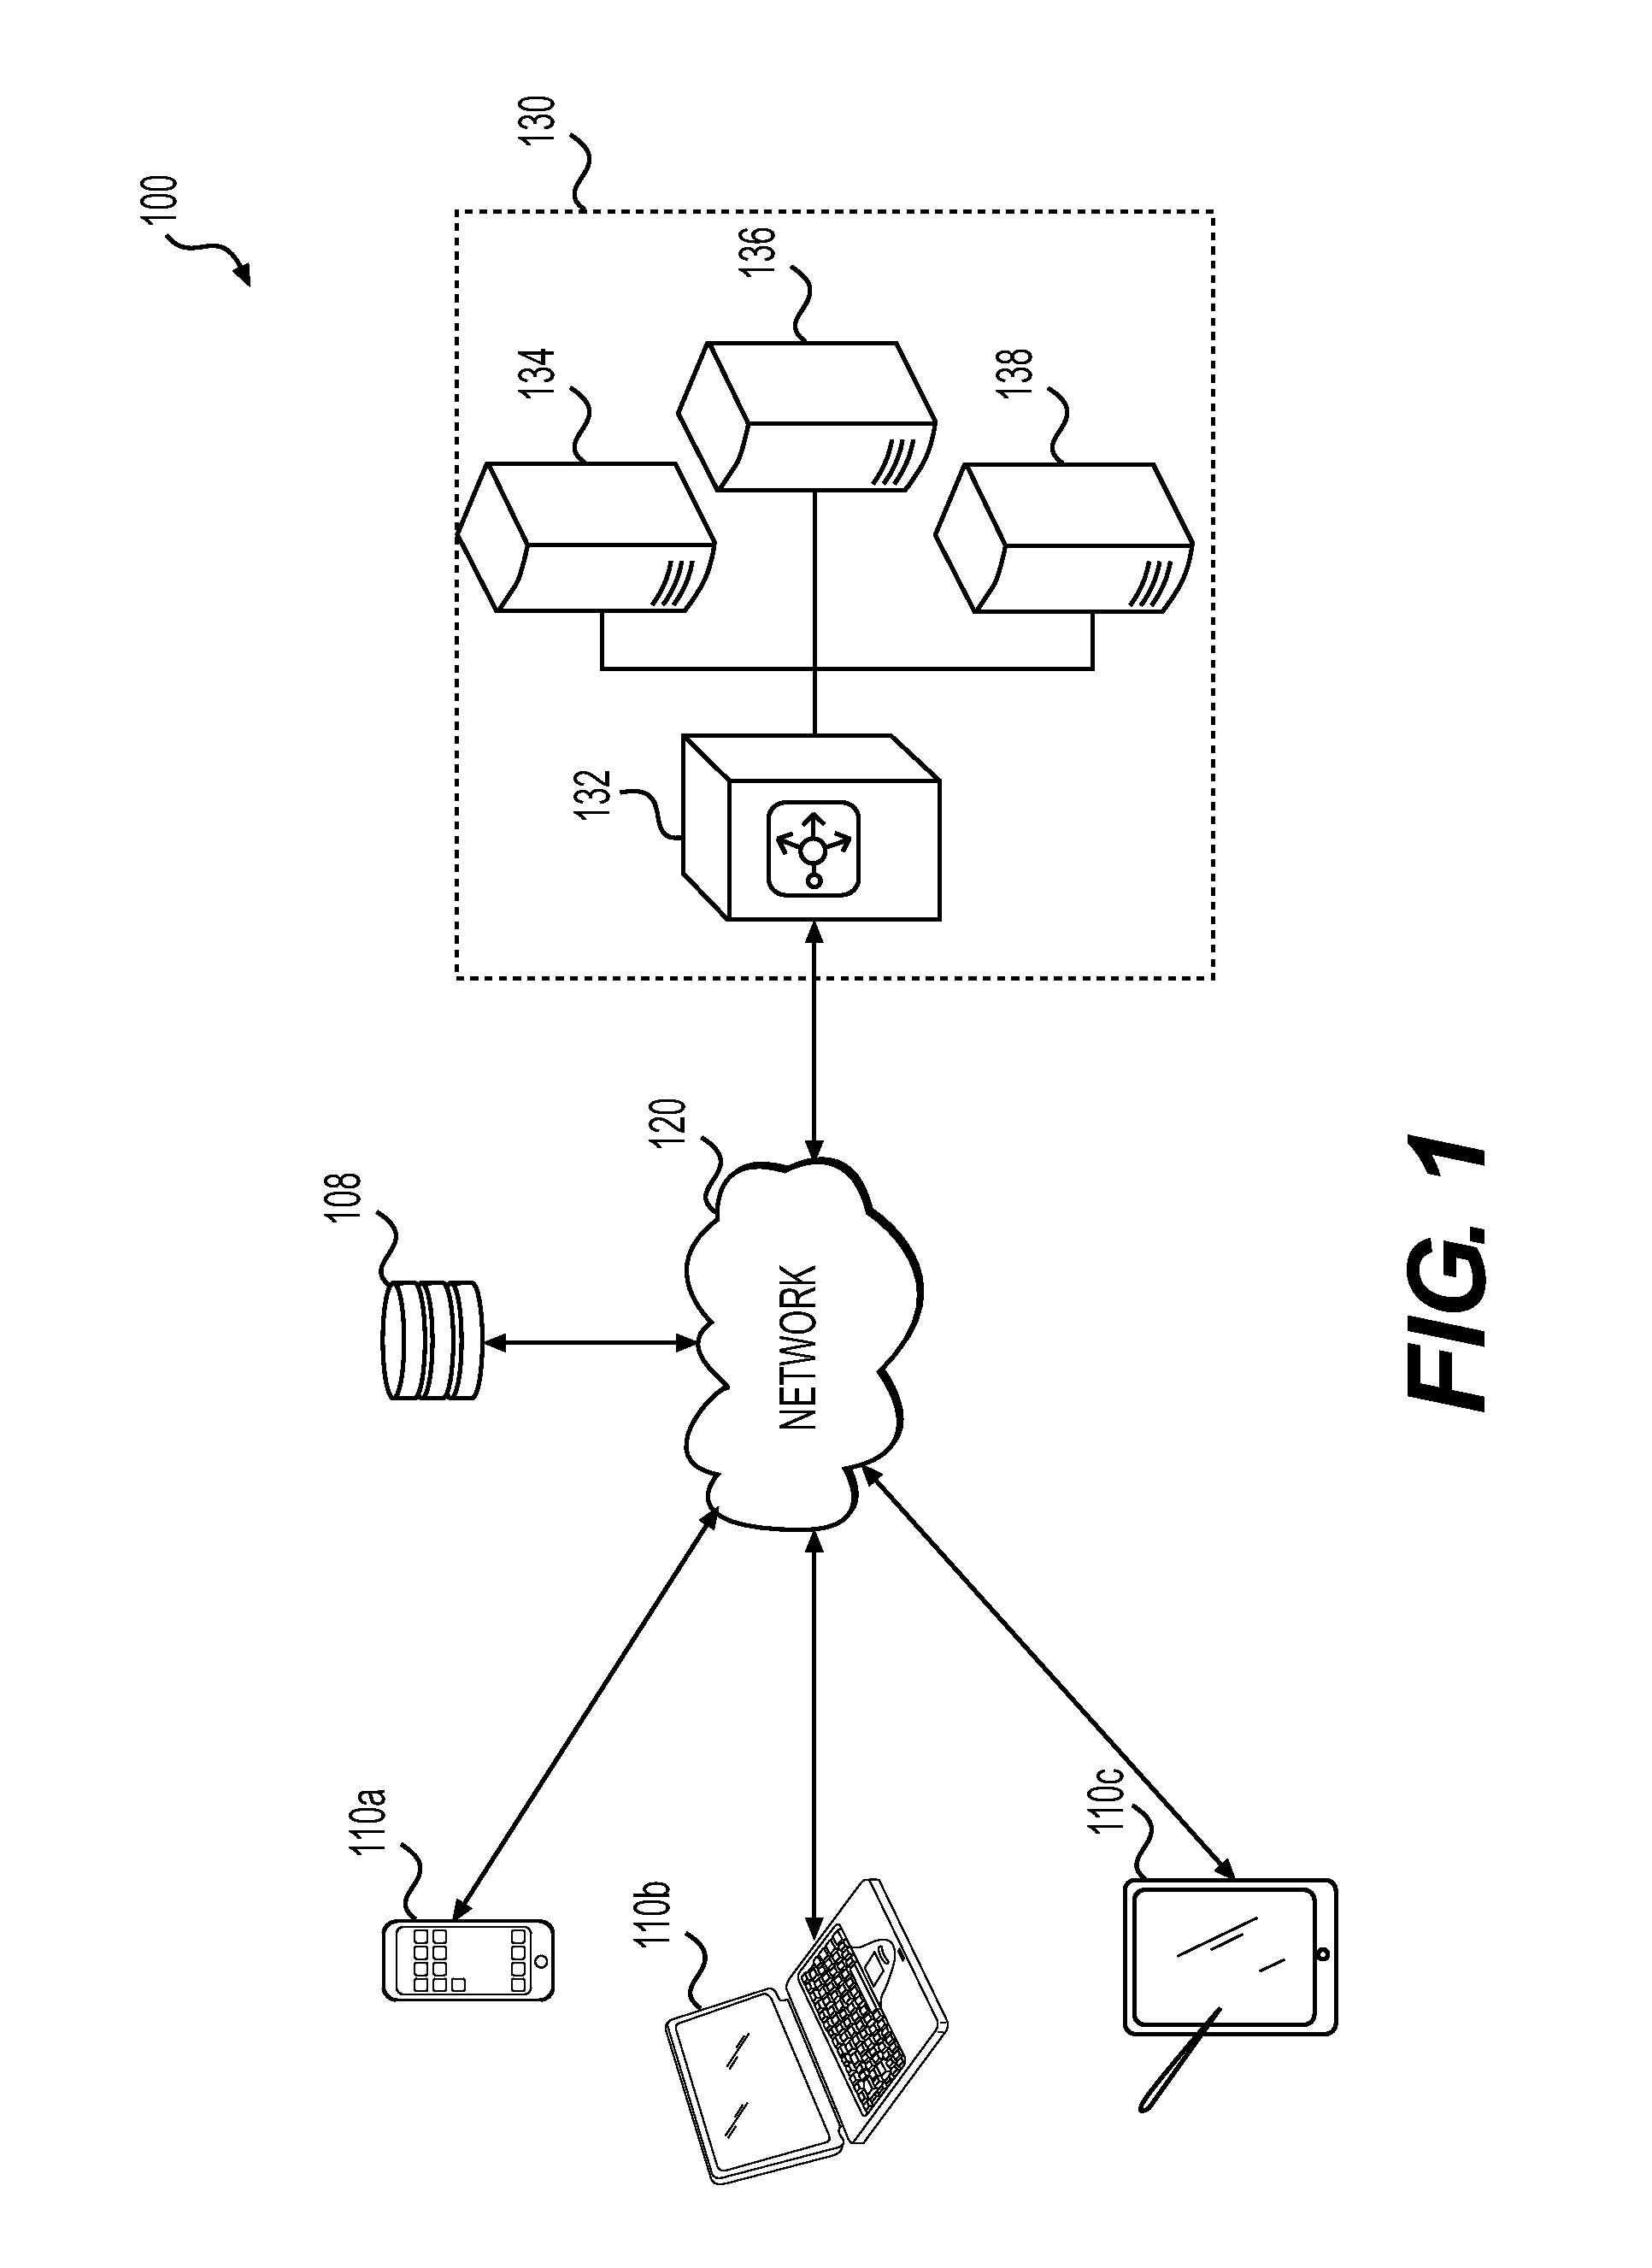 Systems and methods for directly responding to distributed network traffic